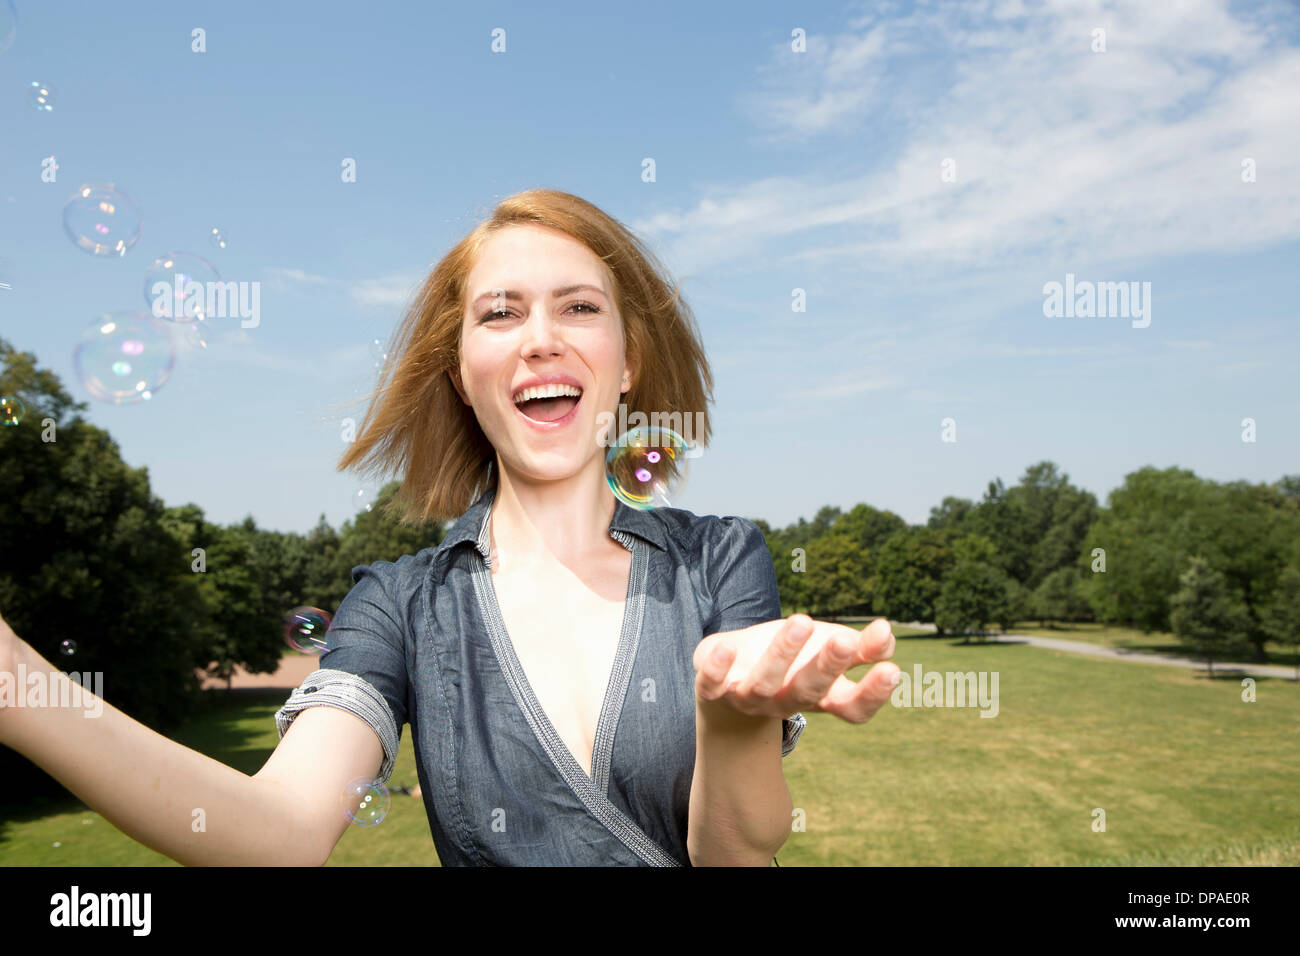 Young woman having fun with bubbles in park Stock Photo